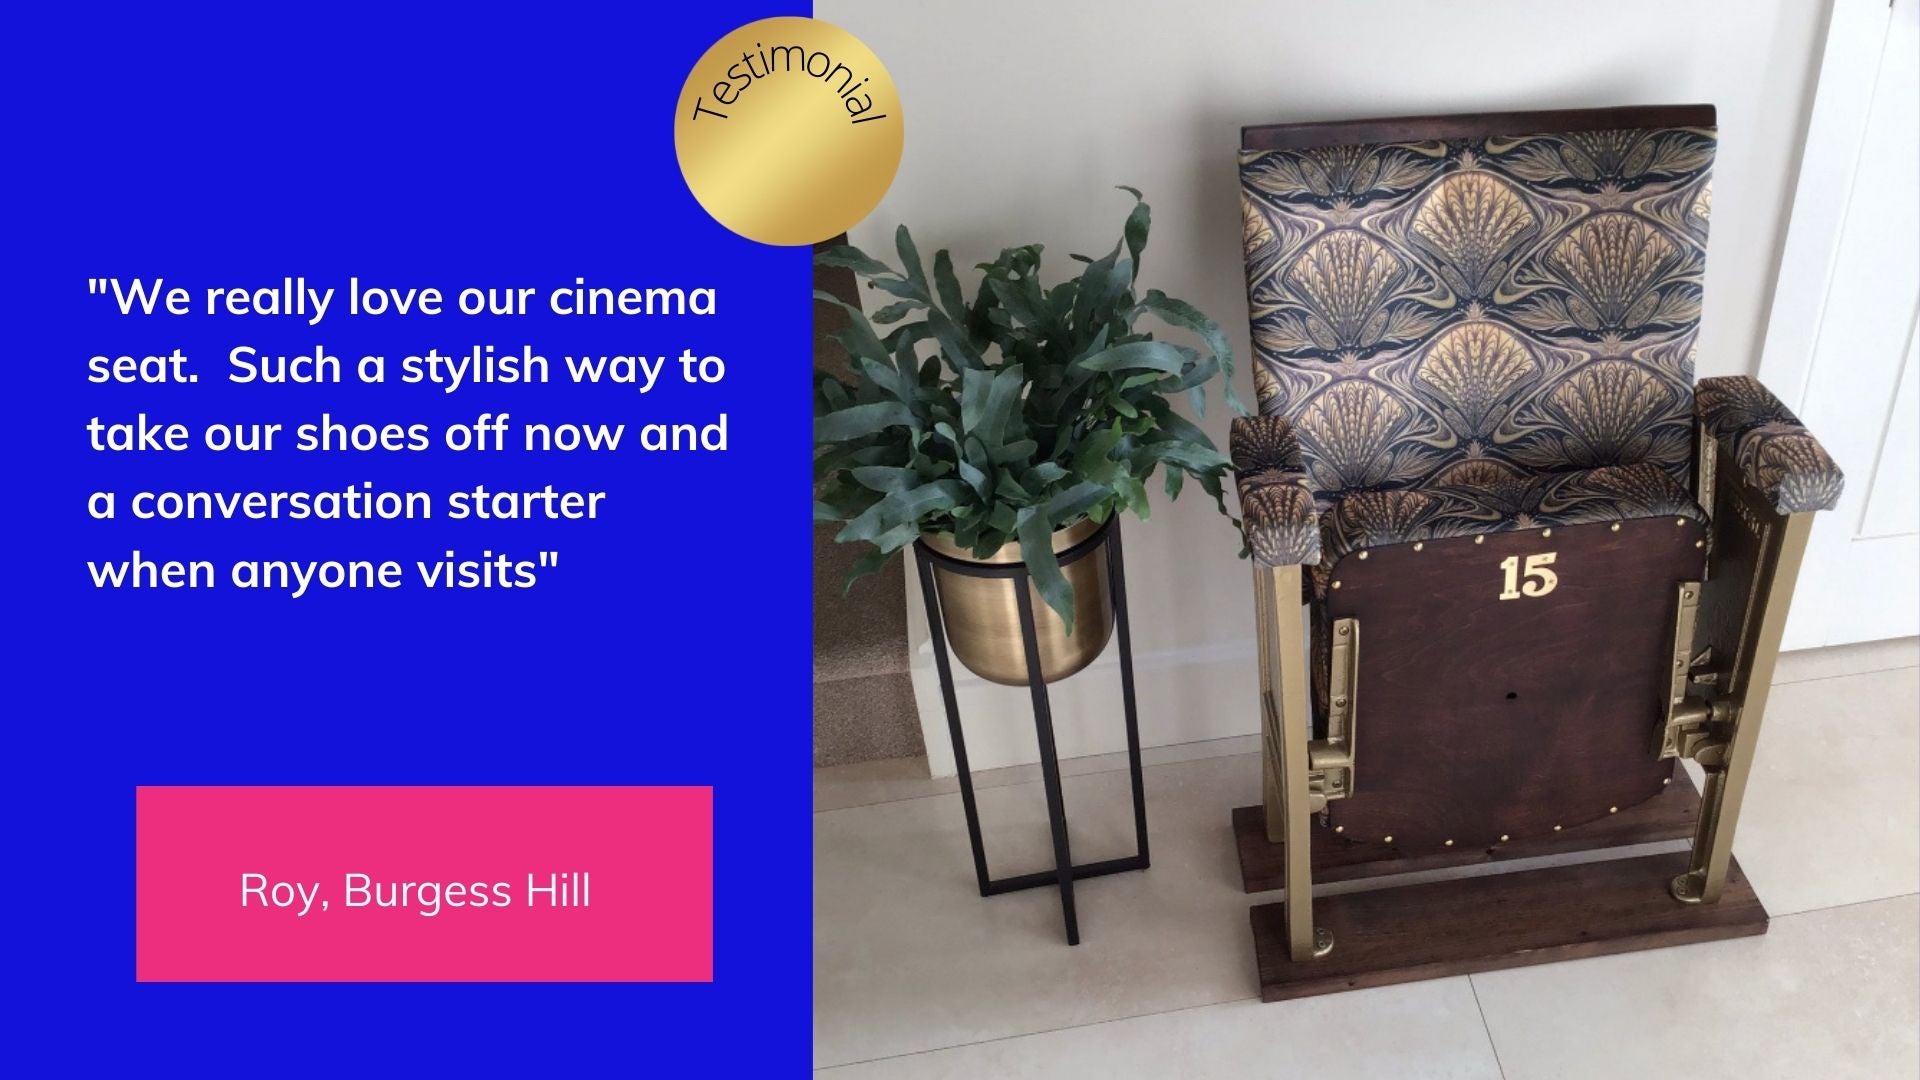 picture of single vintage cinema seat with a plant next to it.  Text in white on a blue box gives a testimonial from the customer.